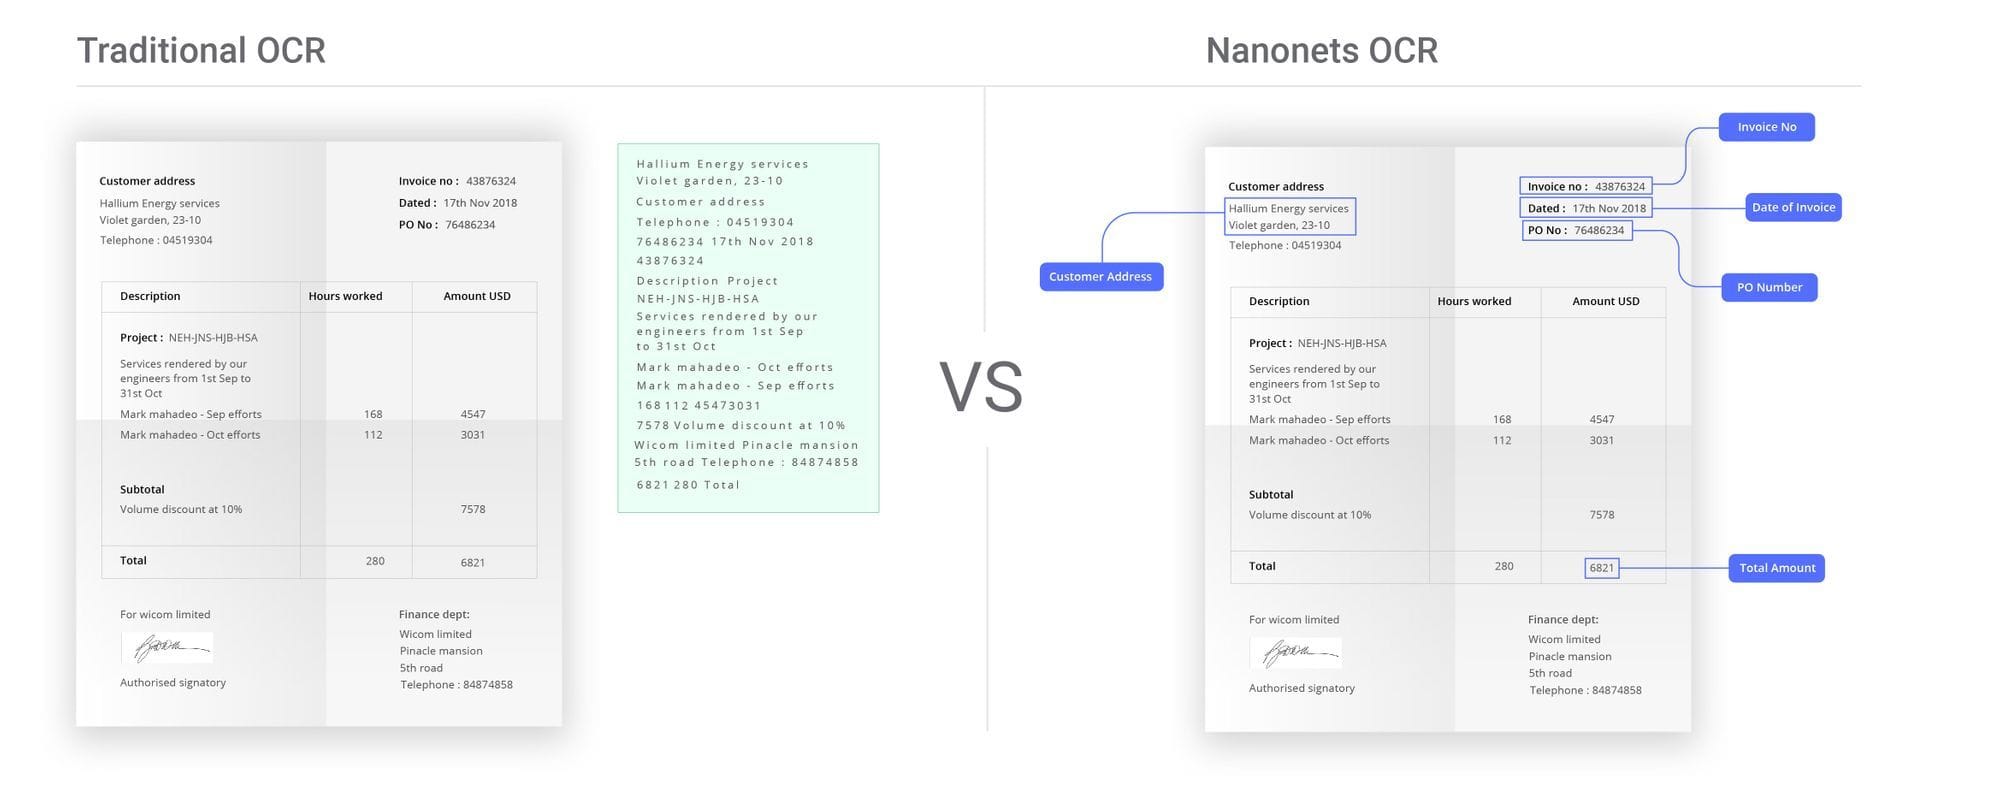 Comparison of Nanonets OCR's advanced customer order capture capabilities with traditional OCR tools